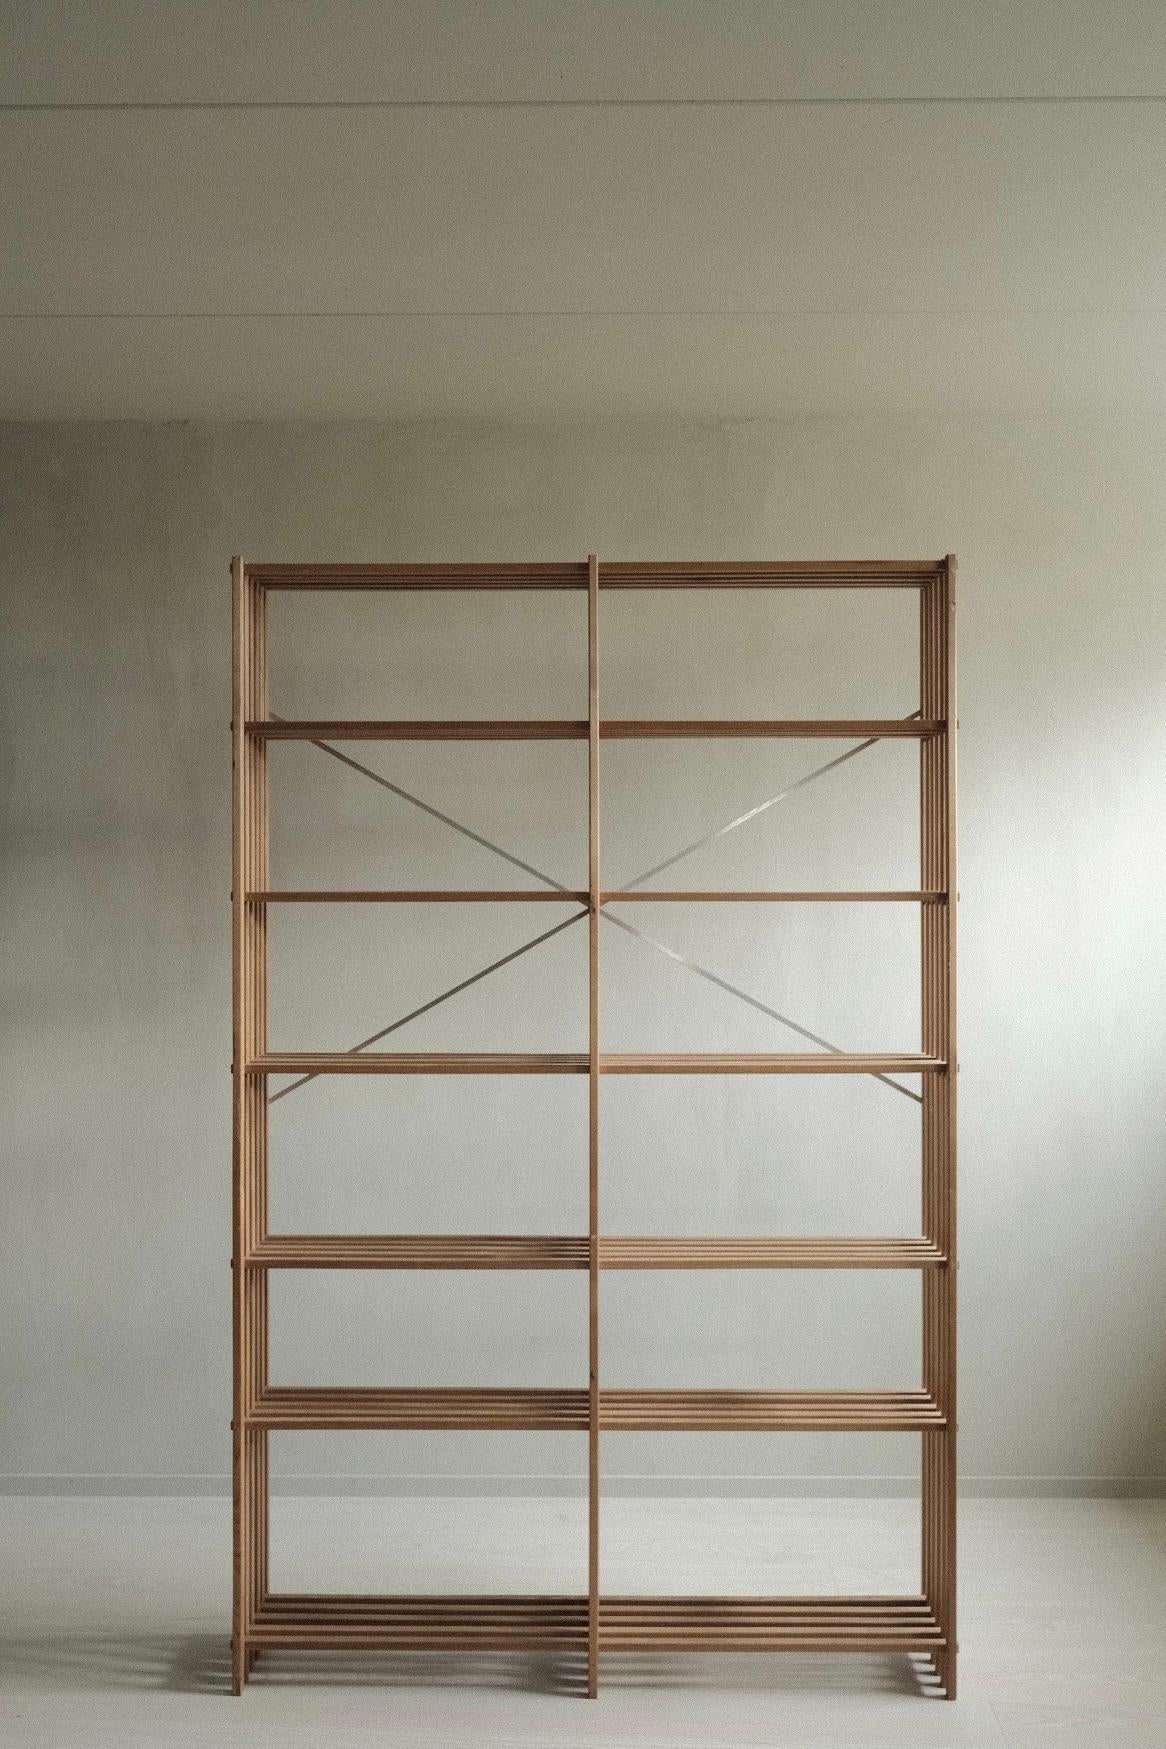 A Mid-Century Modern Danish slatted bookcase by Thorvald Lissau. In solid pine with 6 levels. From circa 1970s.

To ensure stability it should be fitted to the wall. It is not suitable to be standalone. 

